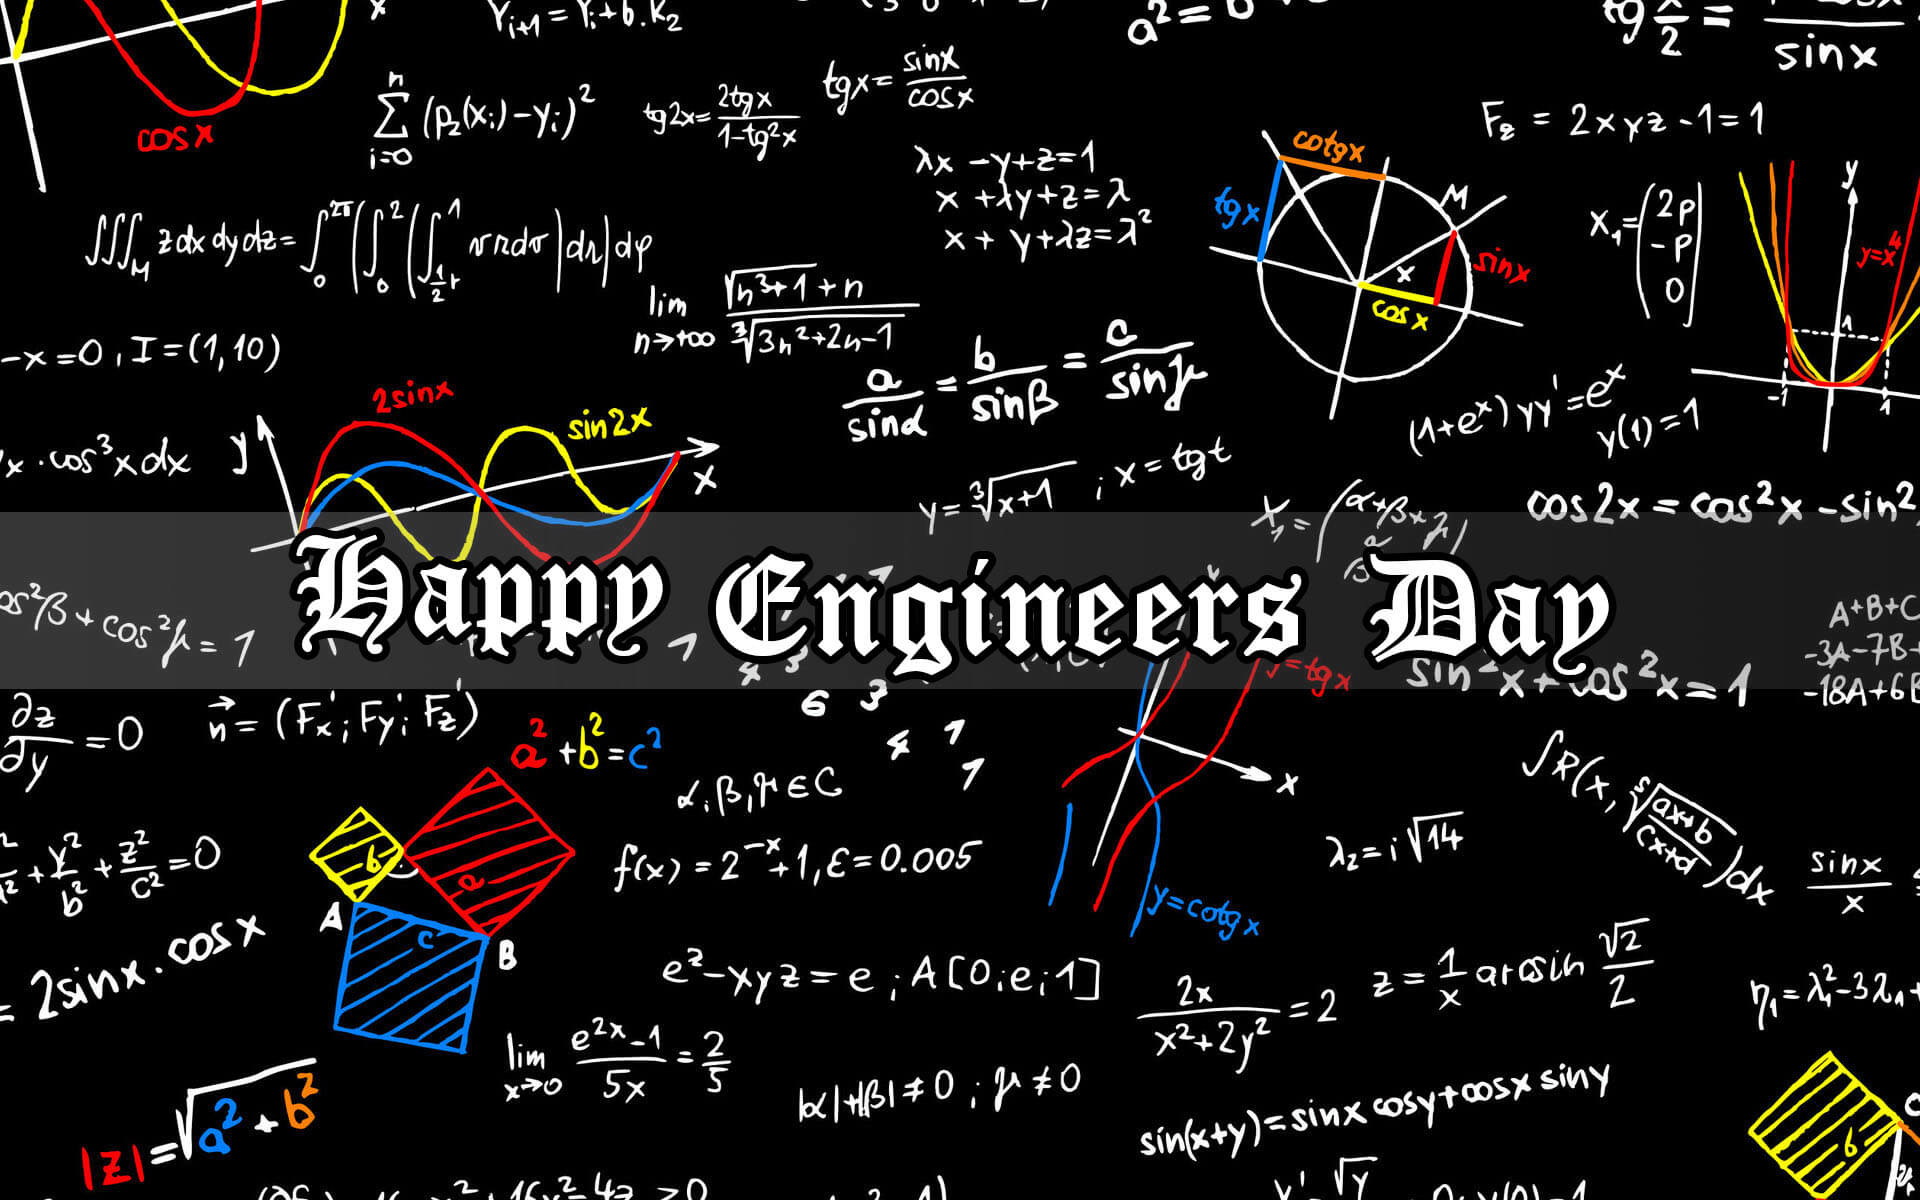 Computer Happy Engineers Day Wallpapers - Wallpaper Cave